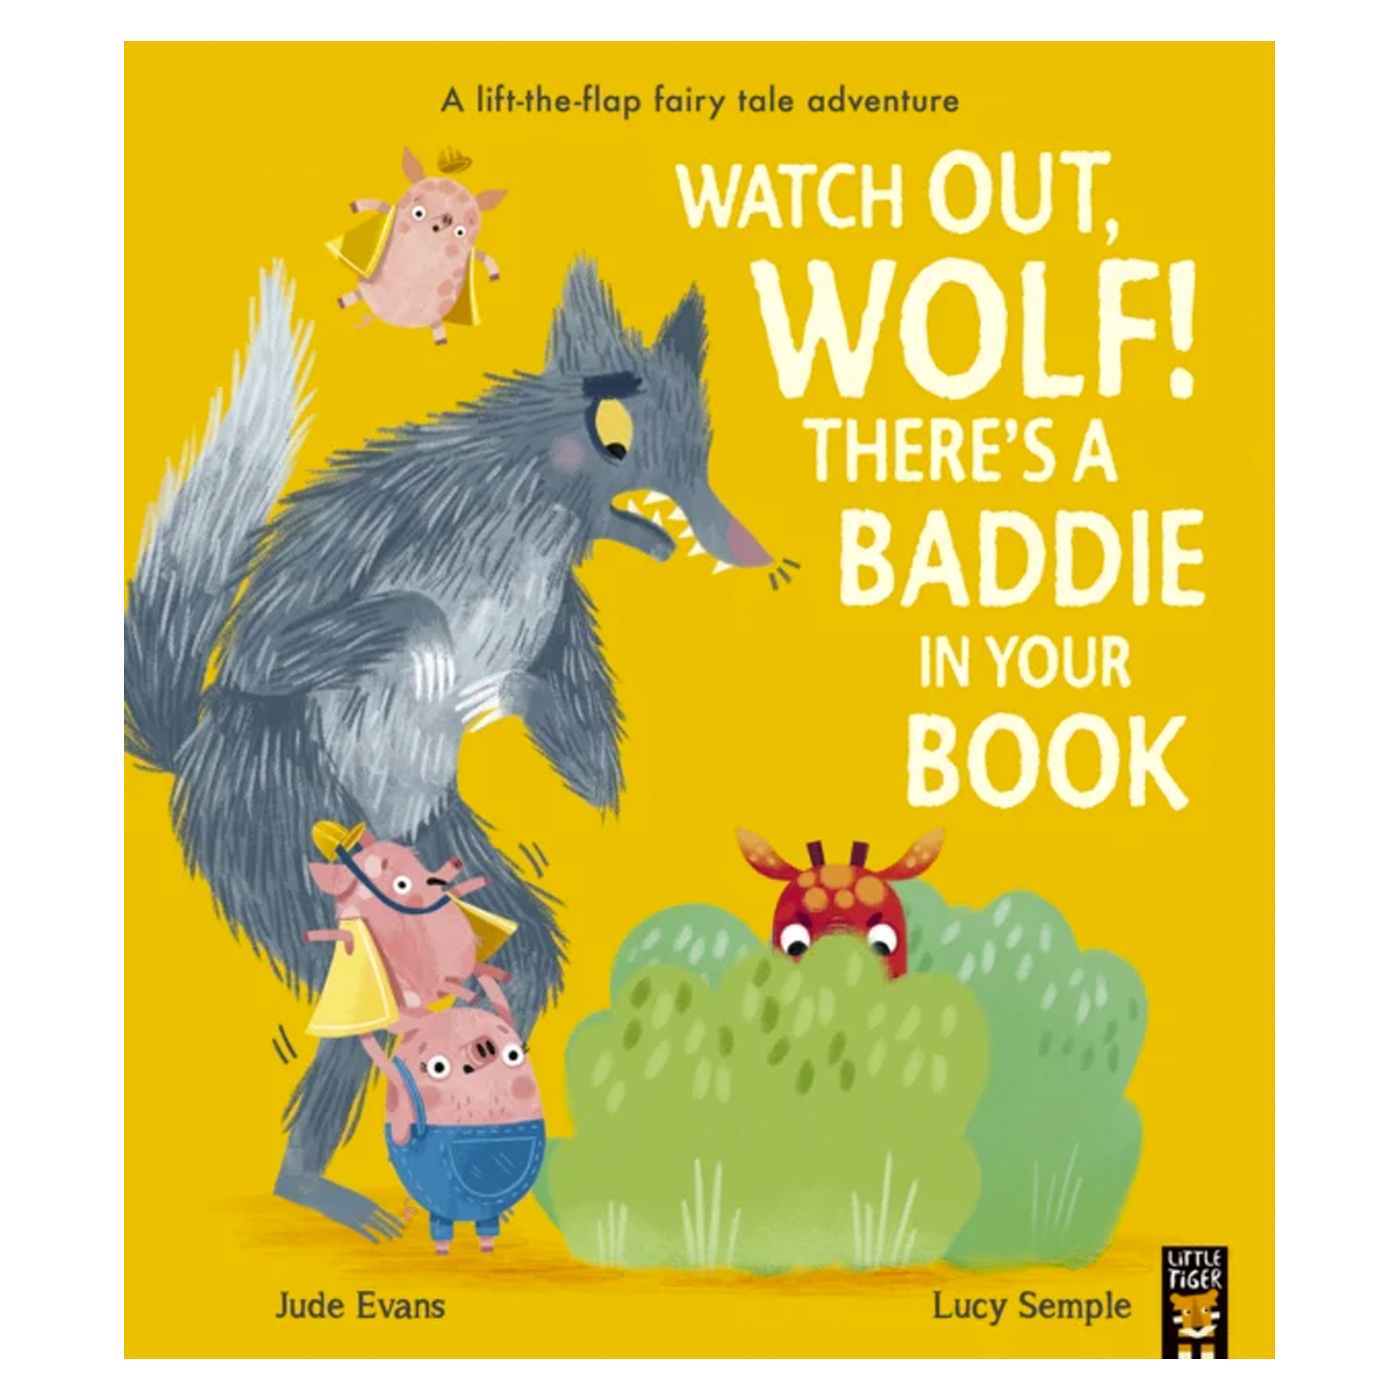  Watch Out, Wolf! There's a Baddie in Your Book